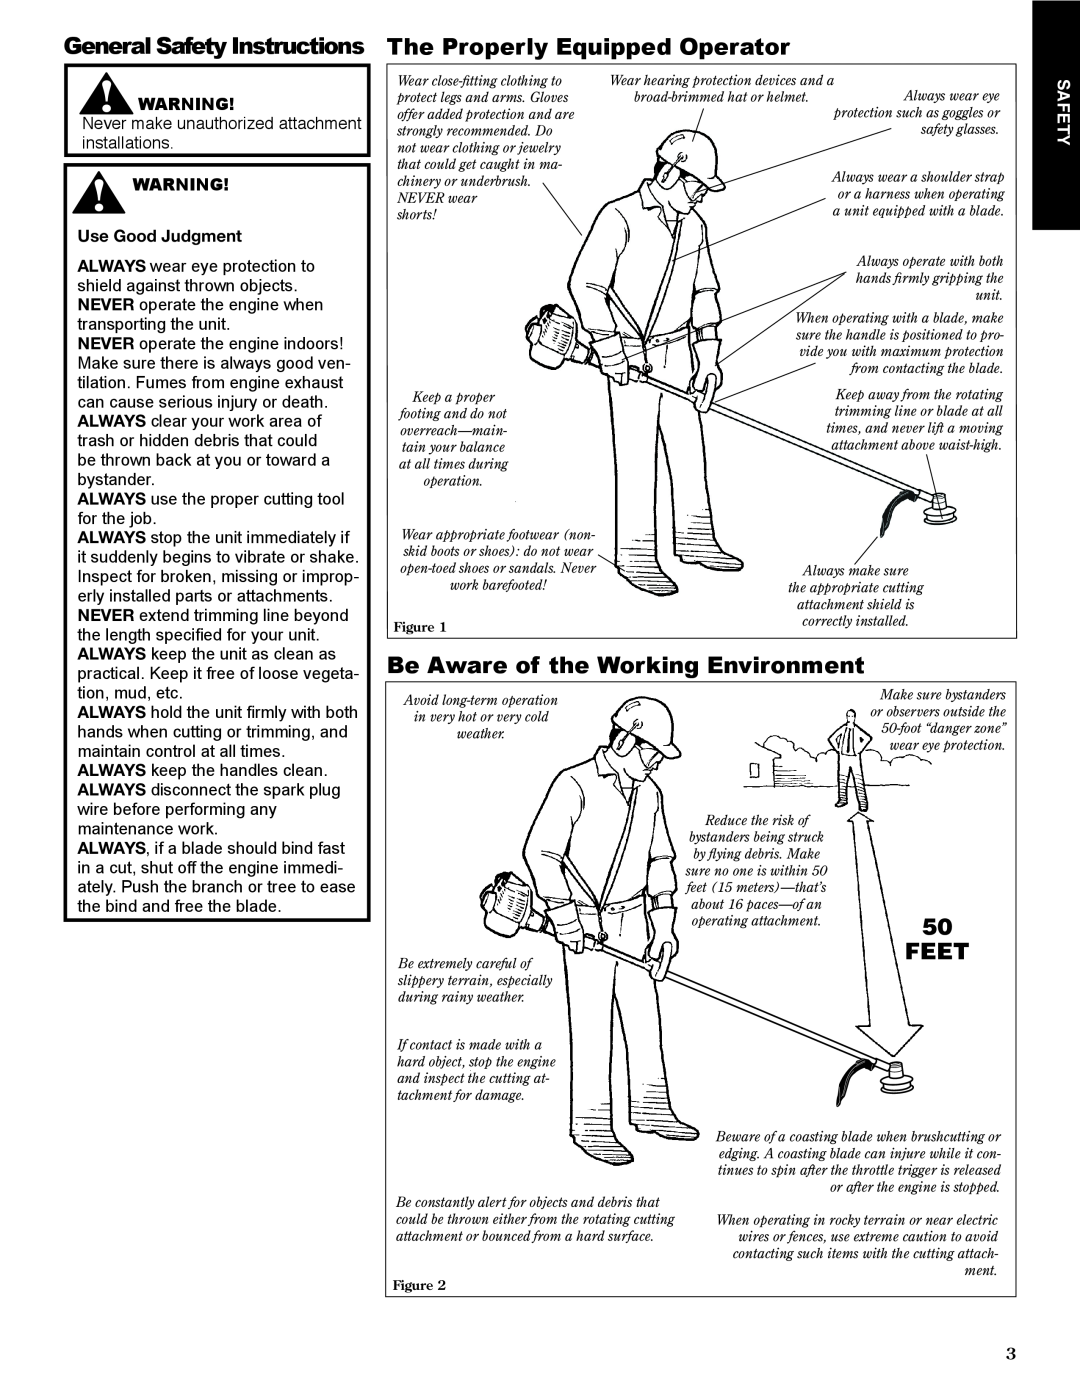 Shindaiwa 80974 General Safety Instructions The Properly Equipped Operator, Be Aware of the Working Environment, Feet 